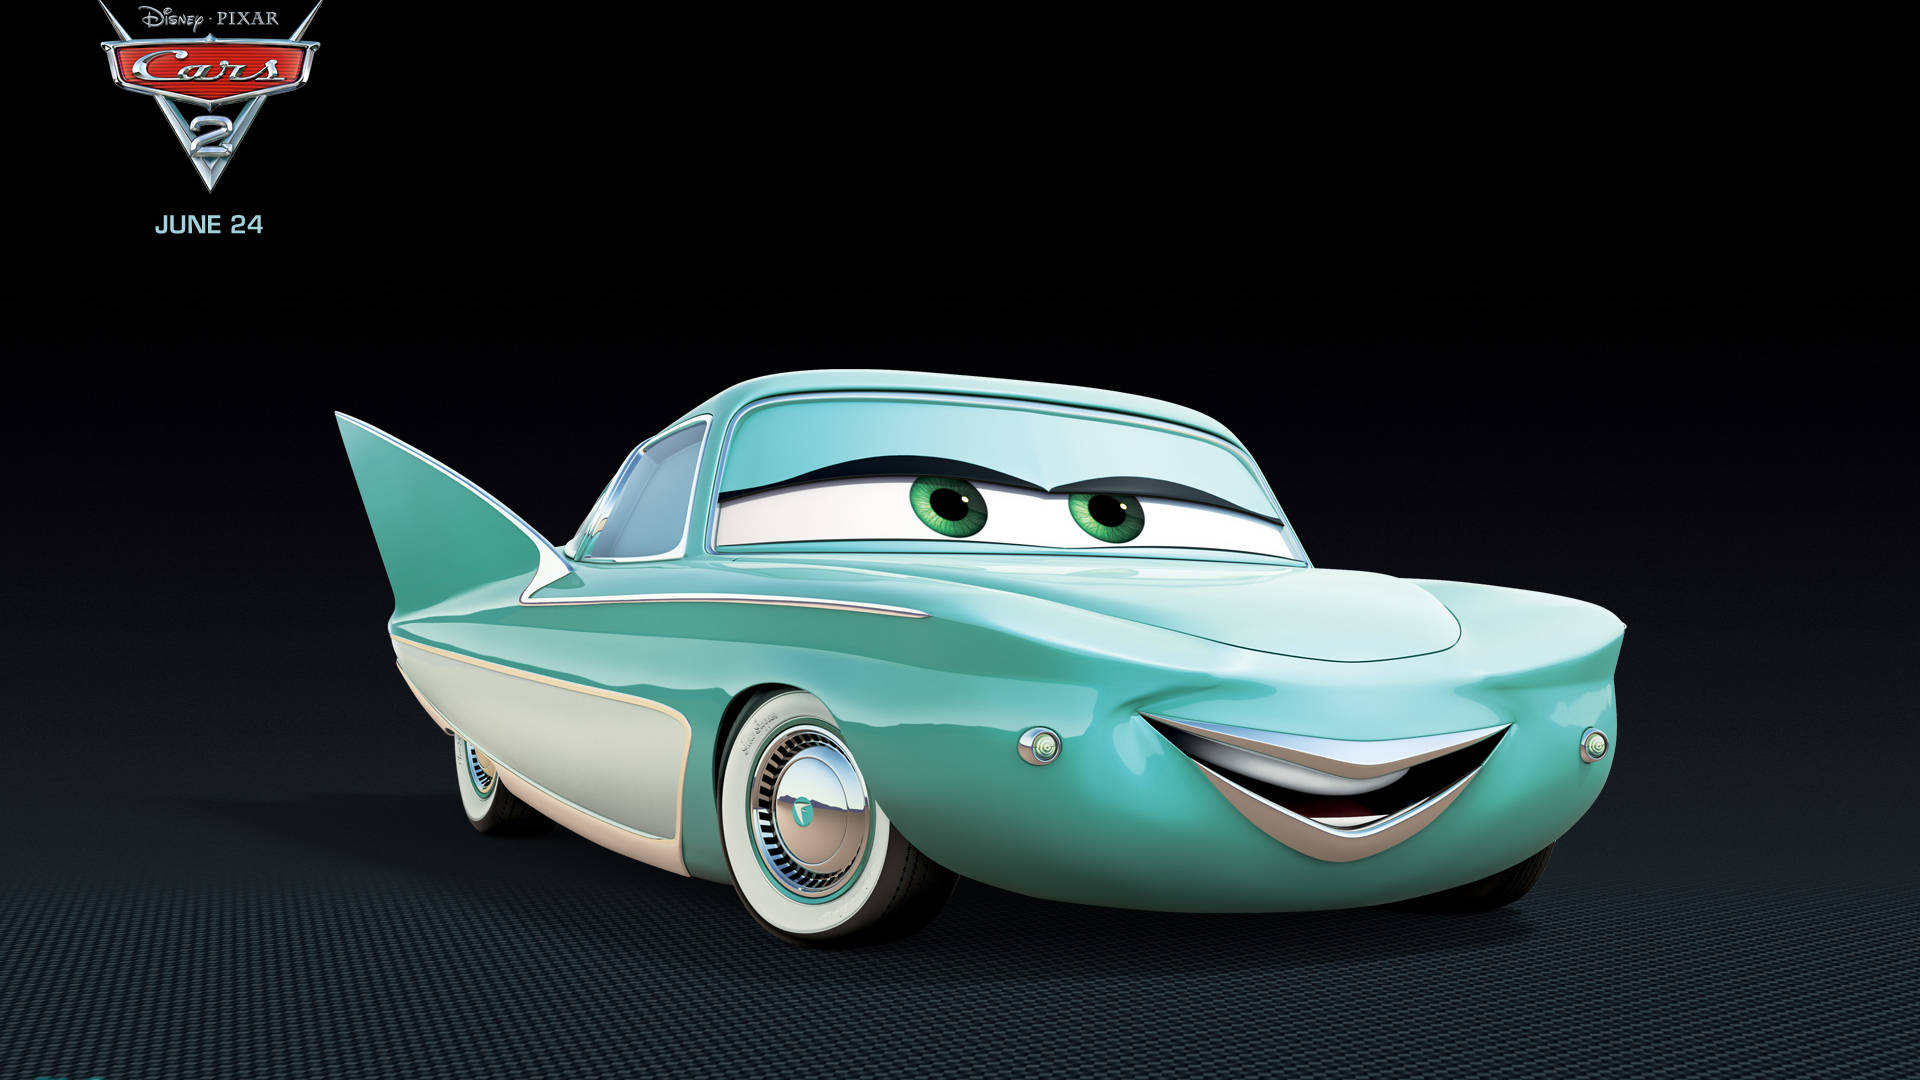 Flo From Pixar's Cars Background